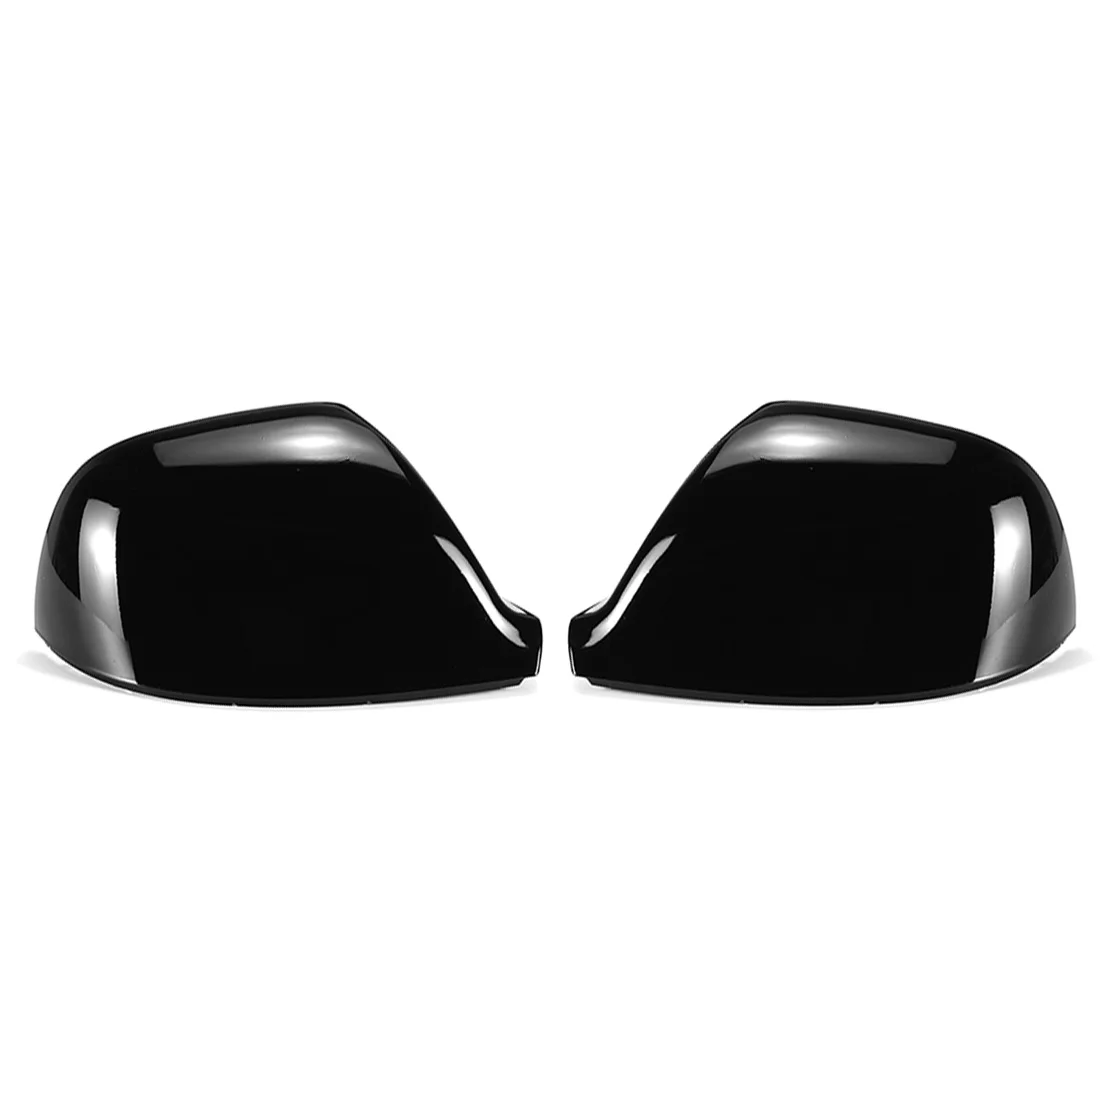 

Glossy Black Mirror Covers Car Side Rearview Wing Mirror Replacement Shell Caps for-VW Transporter T5 T5.1 T6 2010-2019